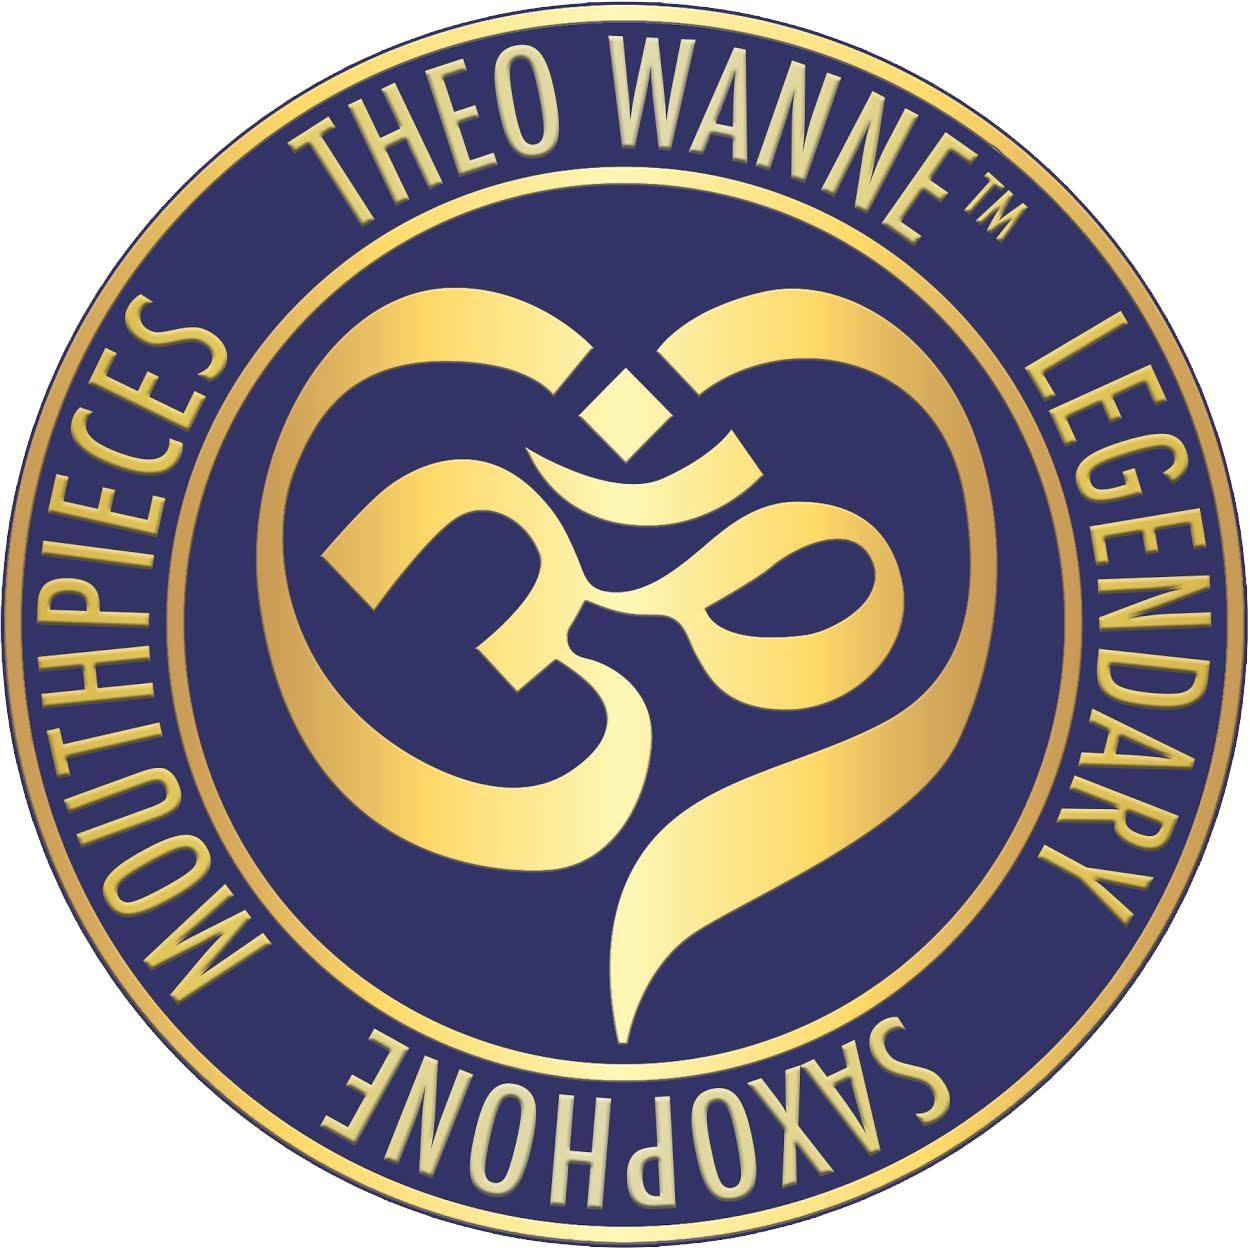 Company logo of Theo Wanne Mouthpieces and Instruments